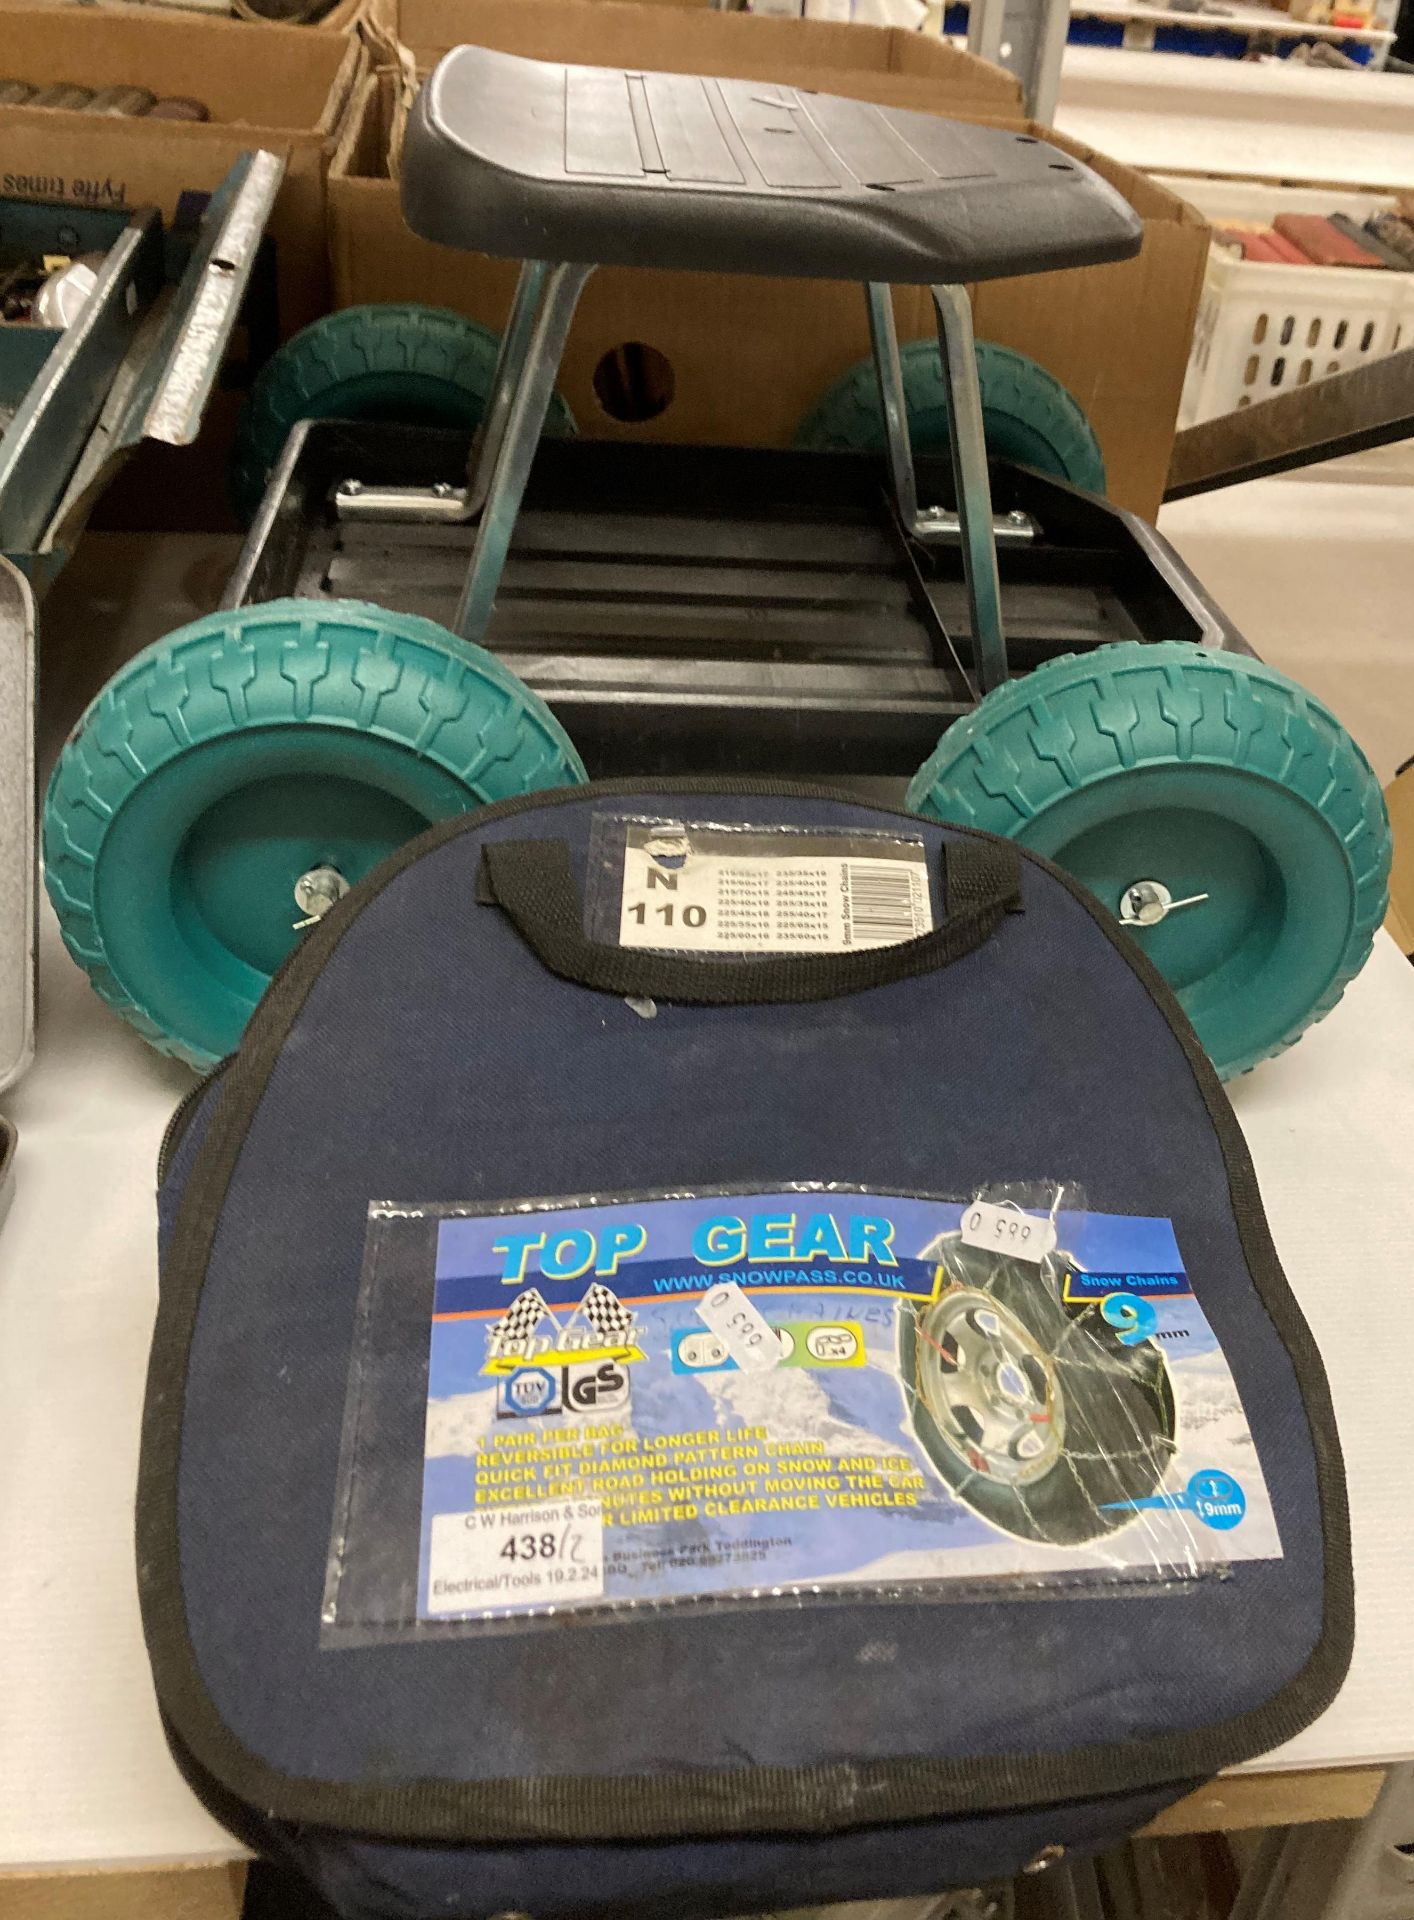 A pair of Top Gear 9mm car wheel snow chains and a wheeled weeding seat (saleroom location: R02)